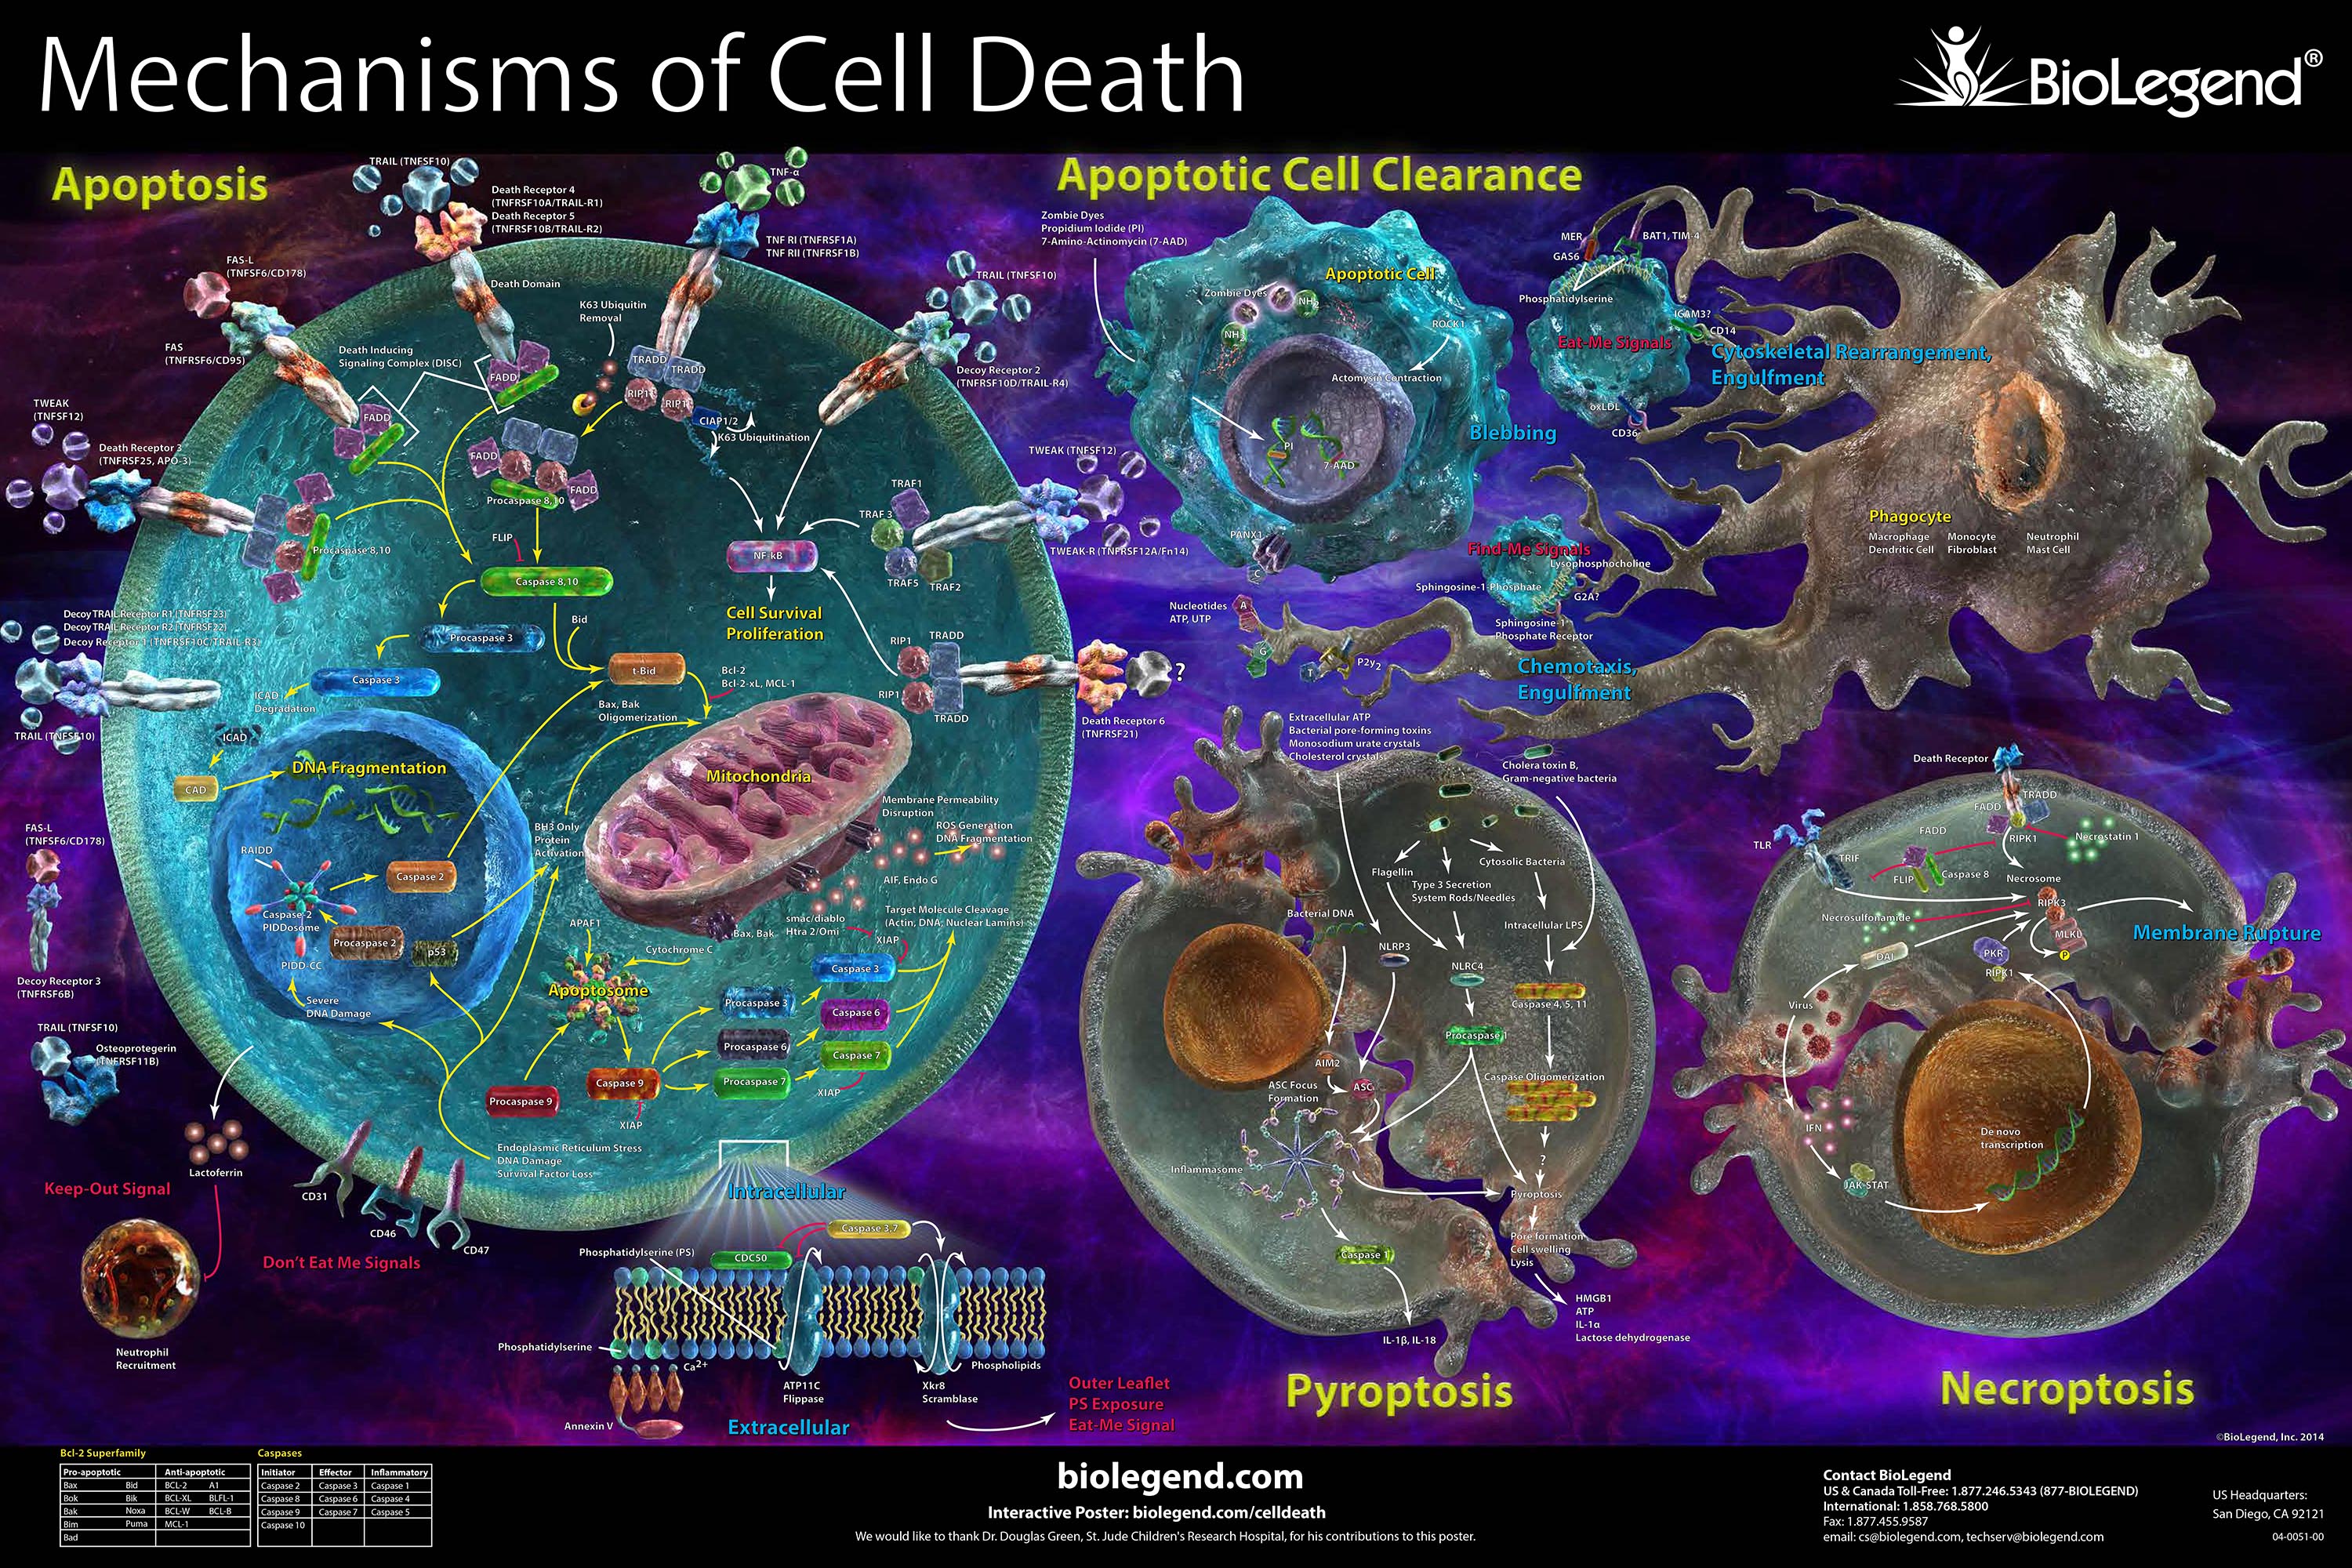 Mechanisims of Cell Death